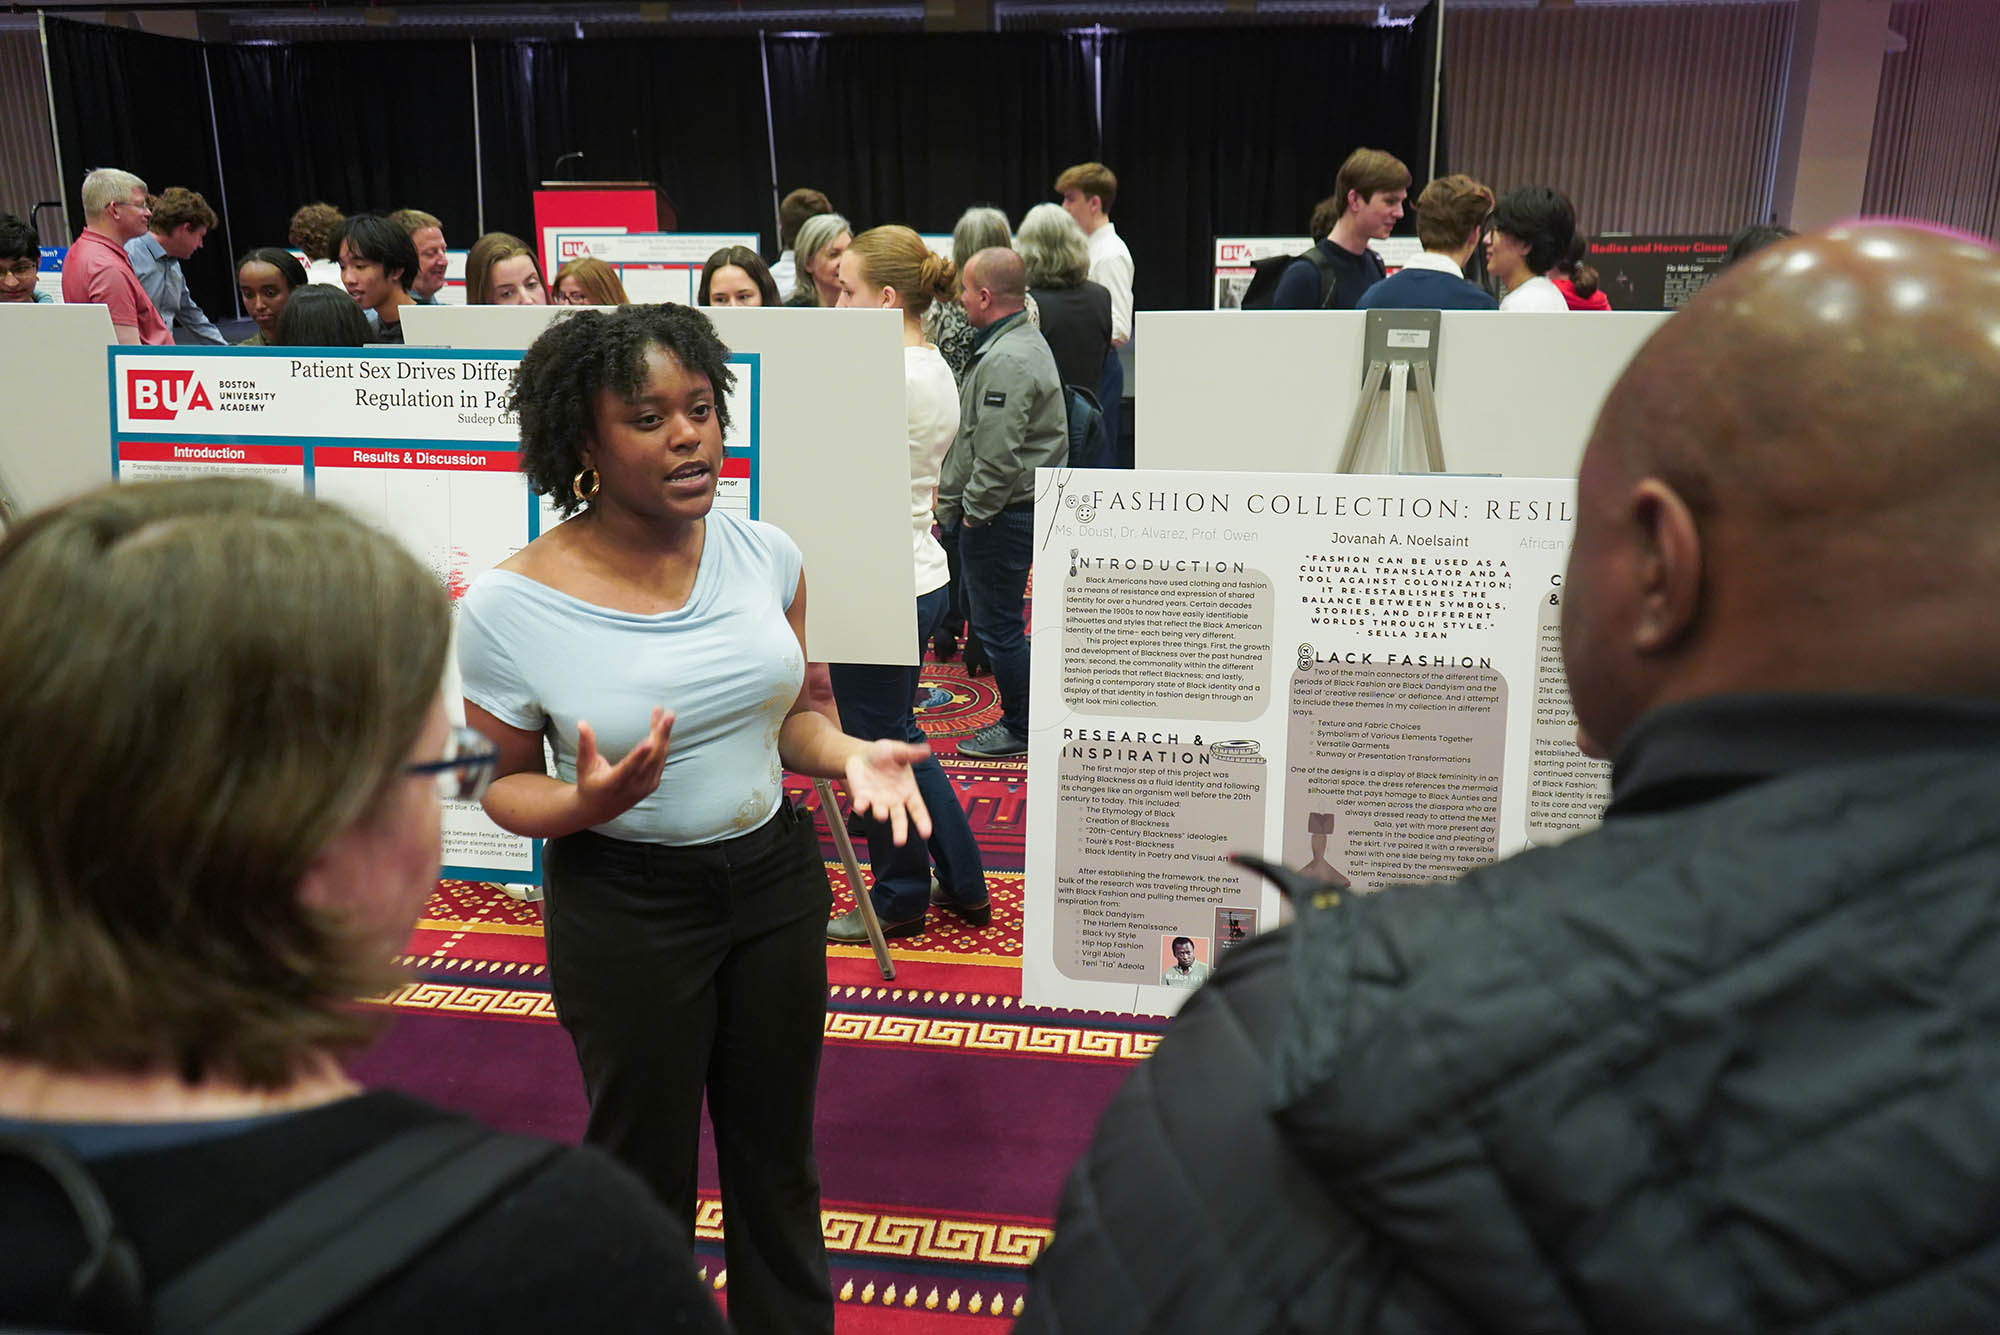 Photo: A black woman with short hair in a blue shirt explains a poster board at a recent poster session for thesis students